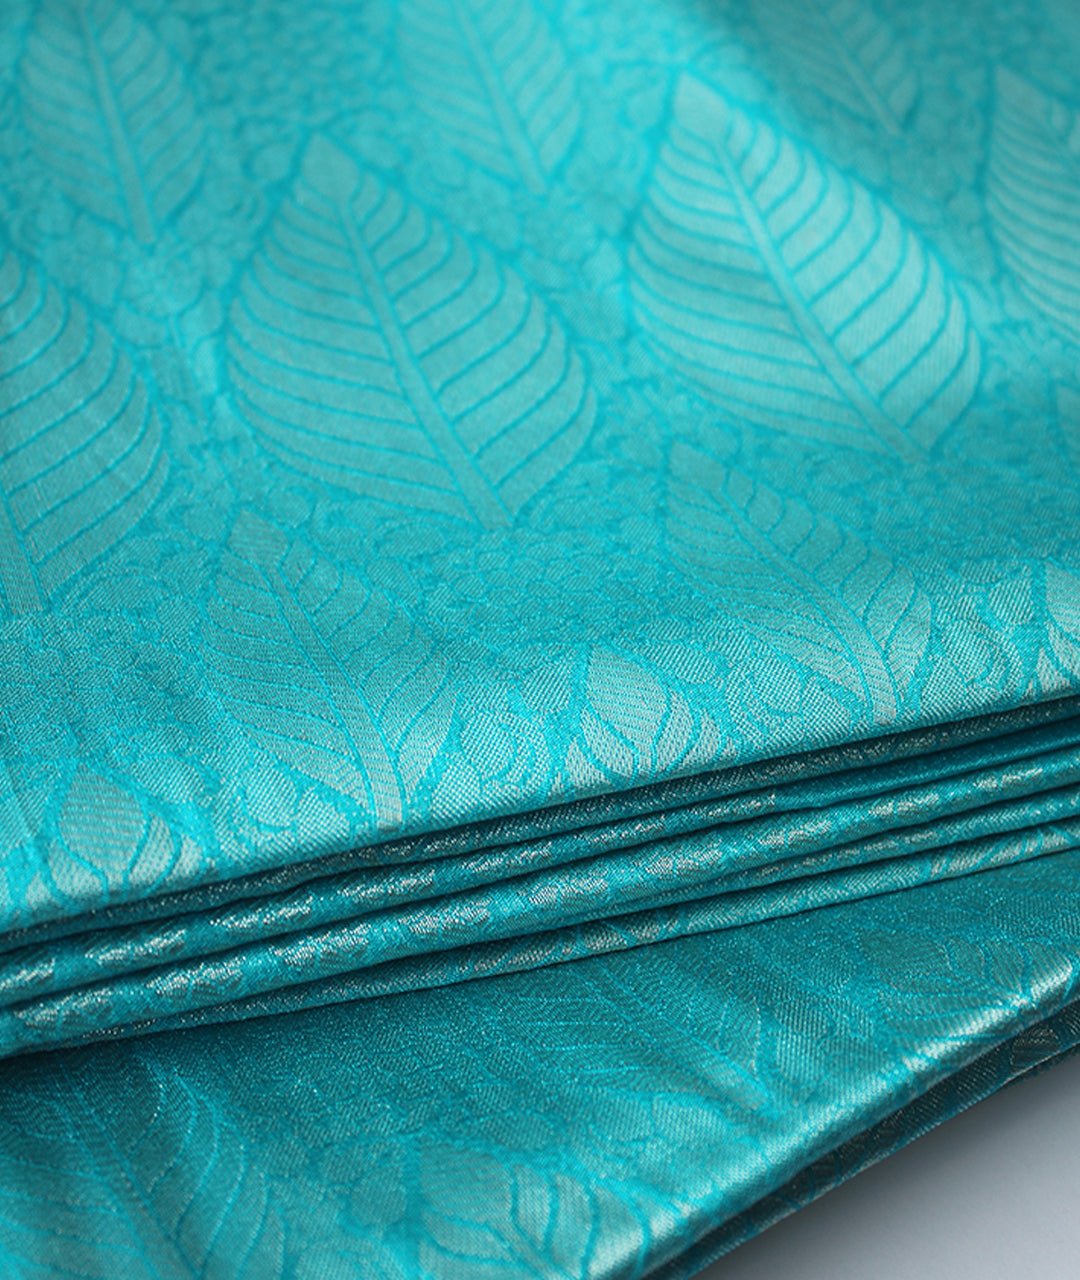  Turquoise Banarasi Saree from Clotho Studio. Shipping all across Canada. Curated products made in India.